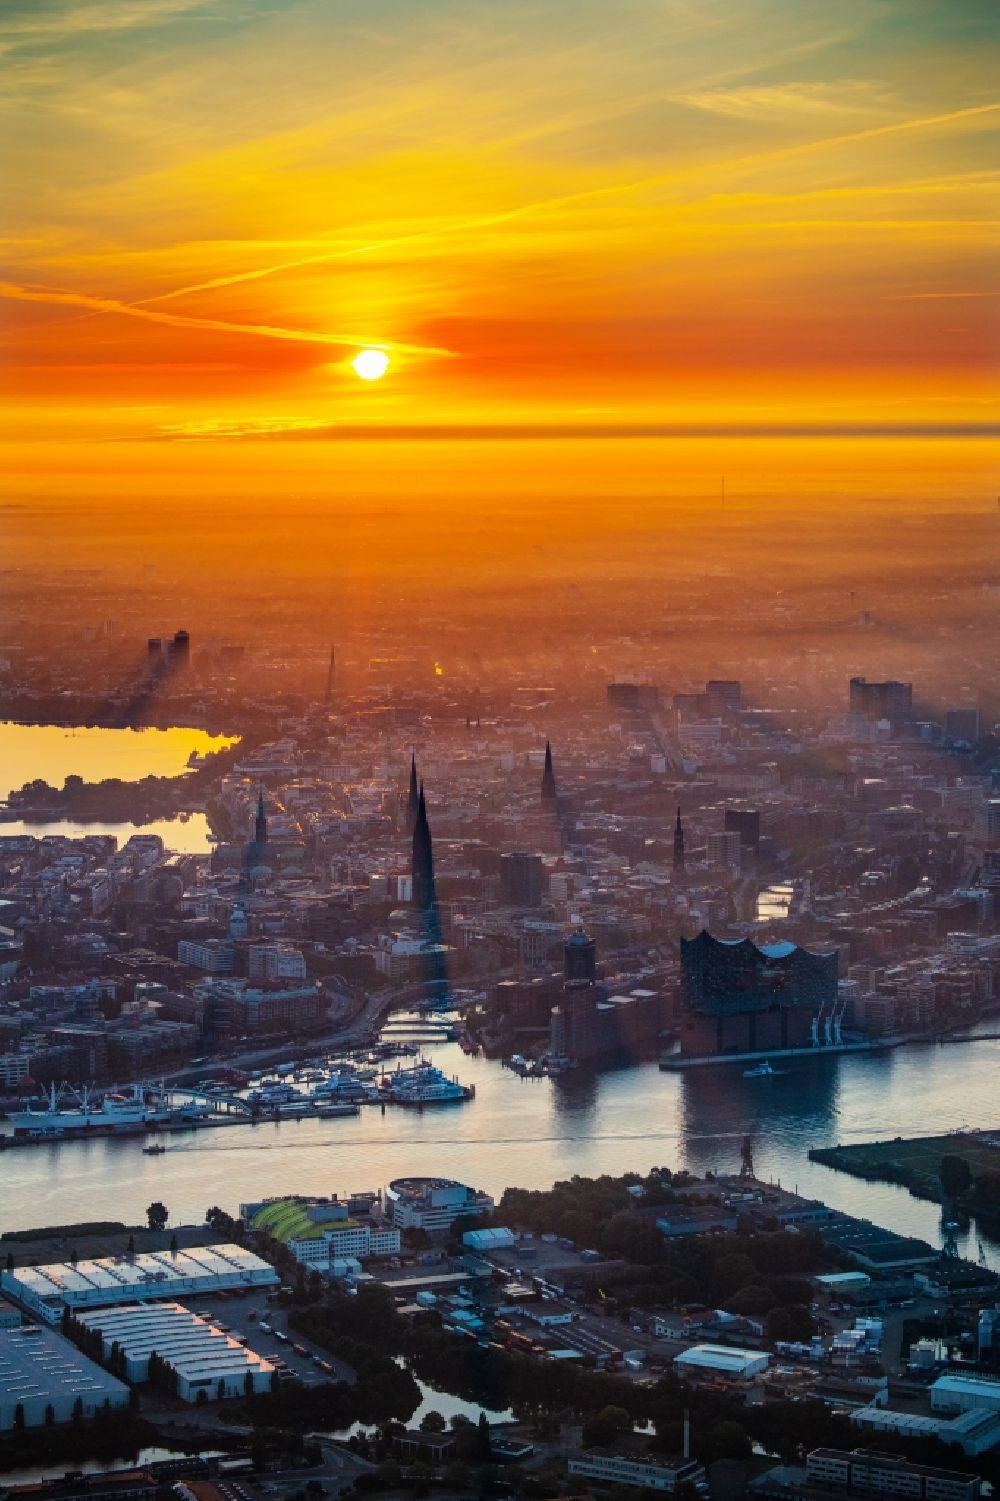 Hamburg from above - Elbphilharmonie concert hall in the Hafencity during sunrise in Hamburg, Germany